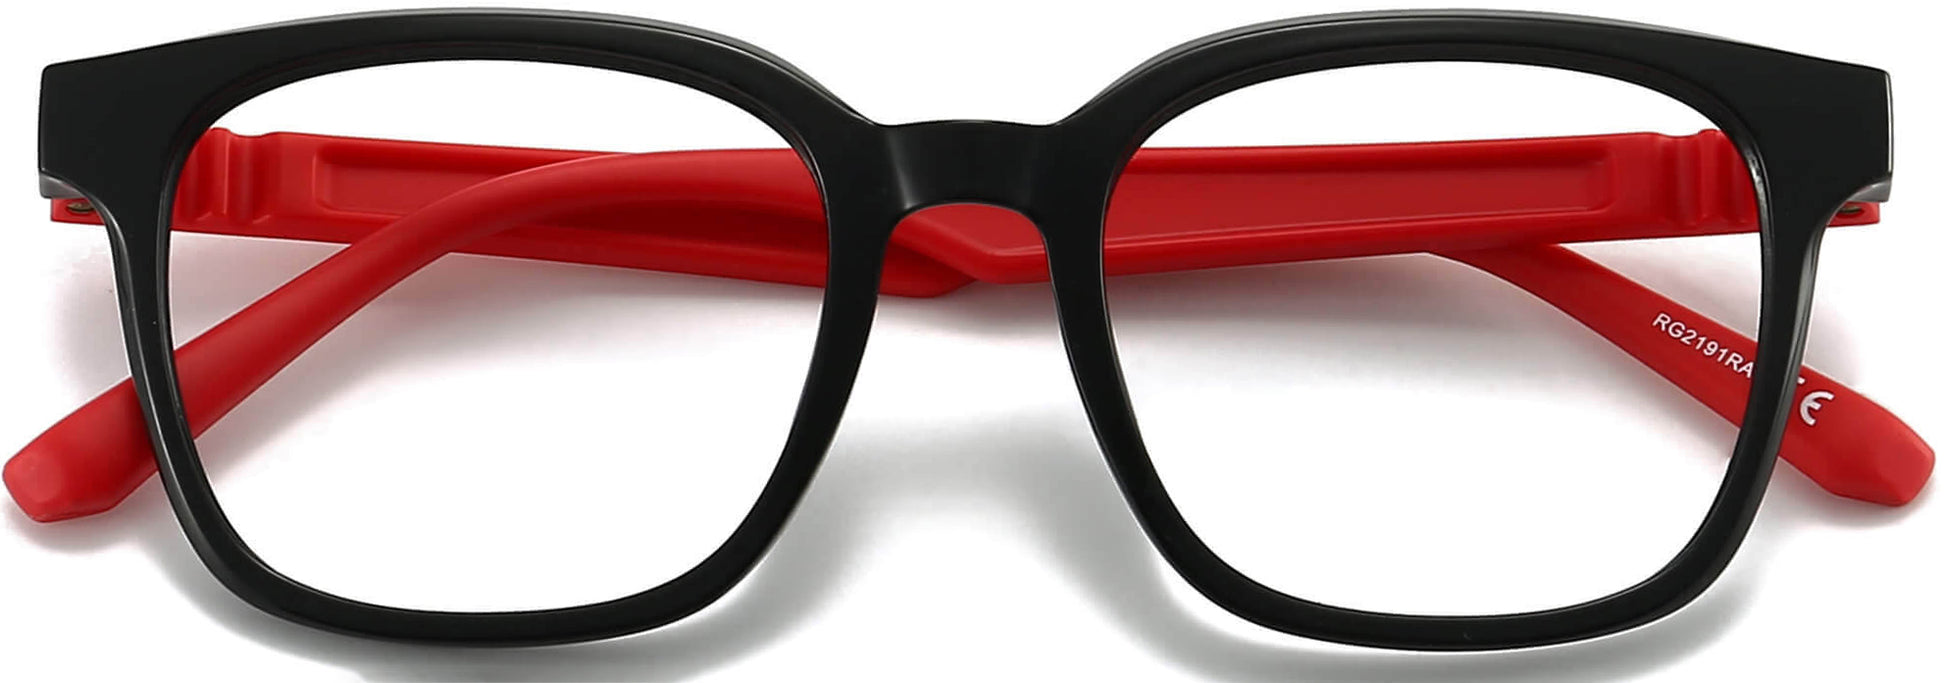 Dale Square Black Eyeglasses from ANRRI, closed view